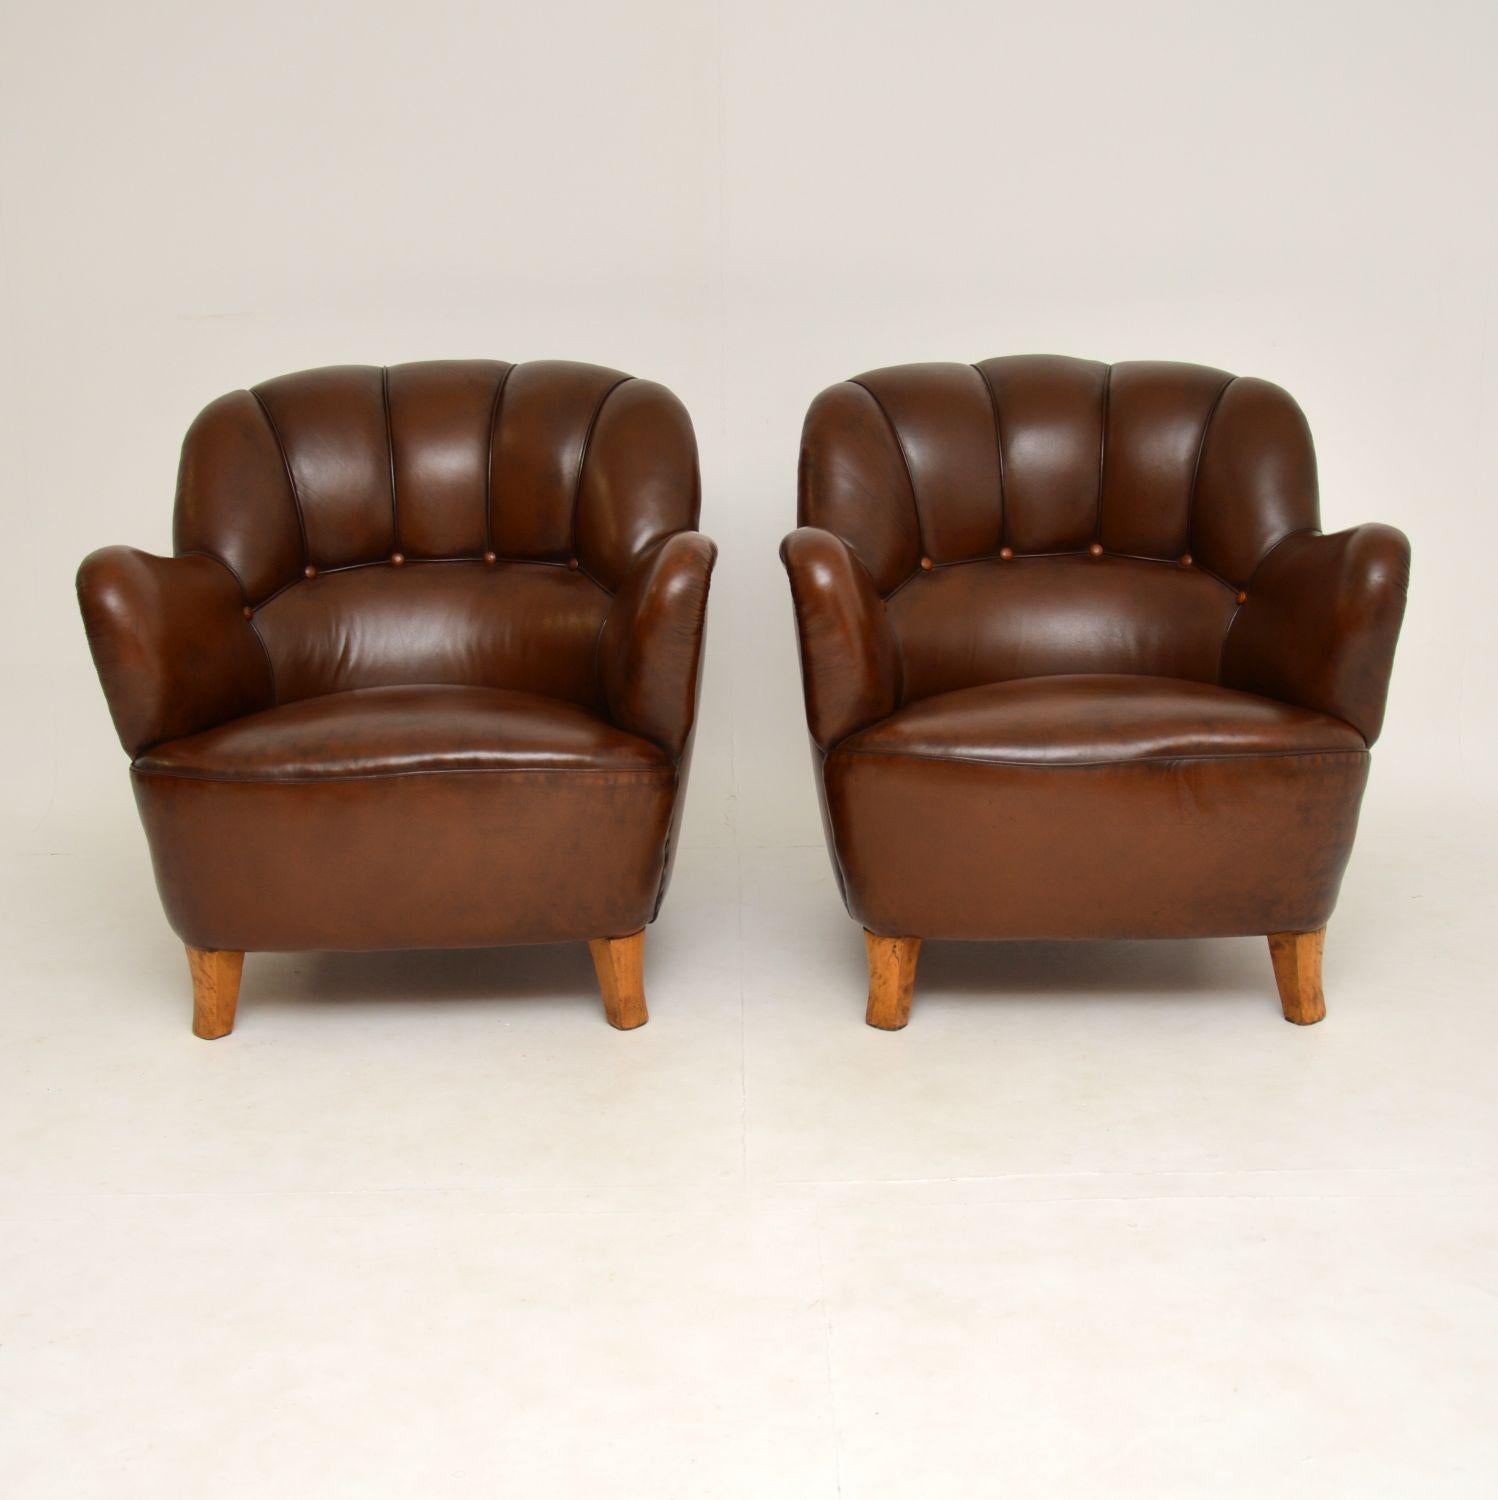 A stunning and extremely comfortable pair of antique leather and satin birch armchairs. These were made in Sweden, they date from circa 1900-1920 period.

They were re-upholstered in high quality leather fairly recently by the previous owners, we